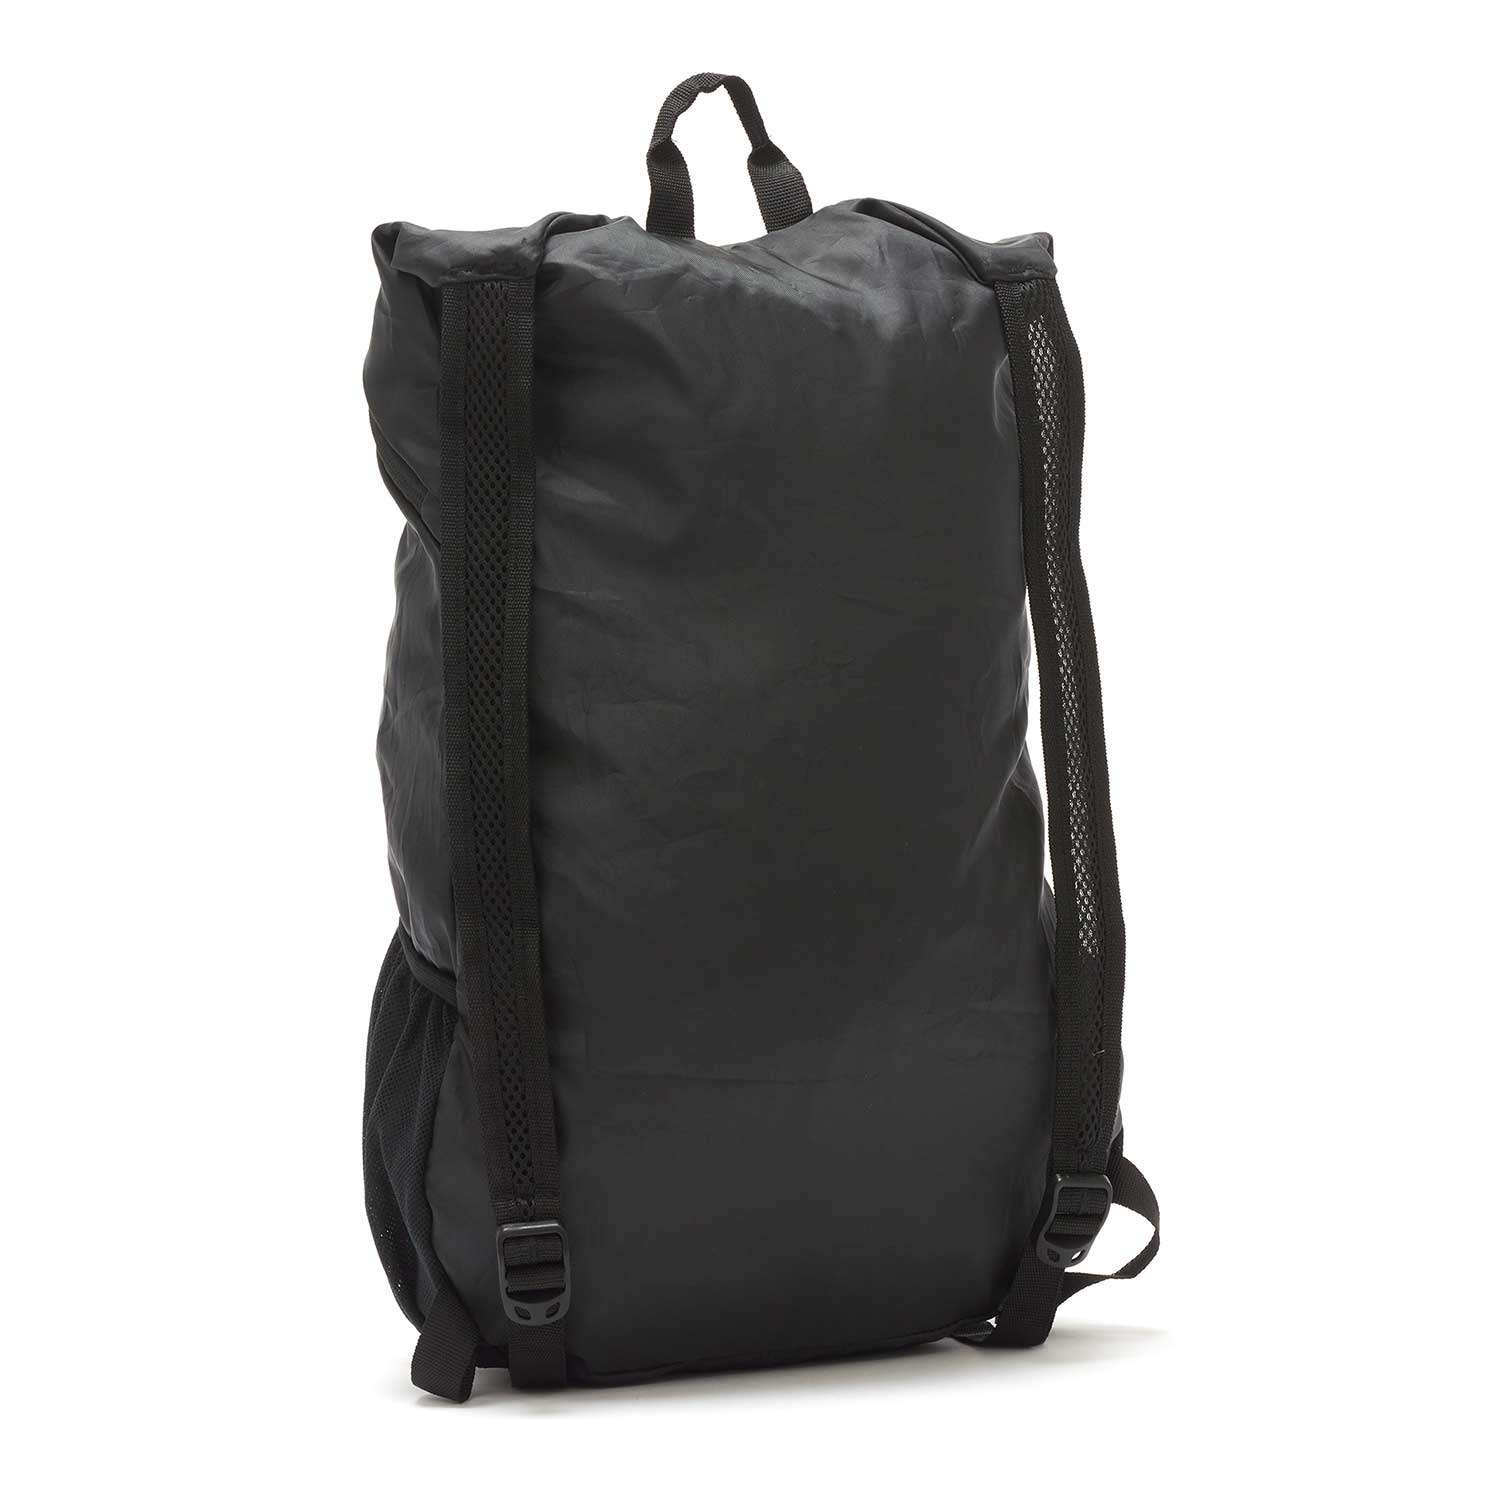 RSPB Sustainable foldaway backpack - Travel accessories